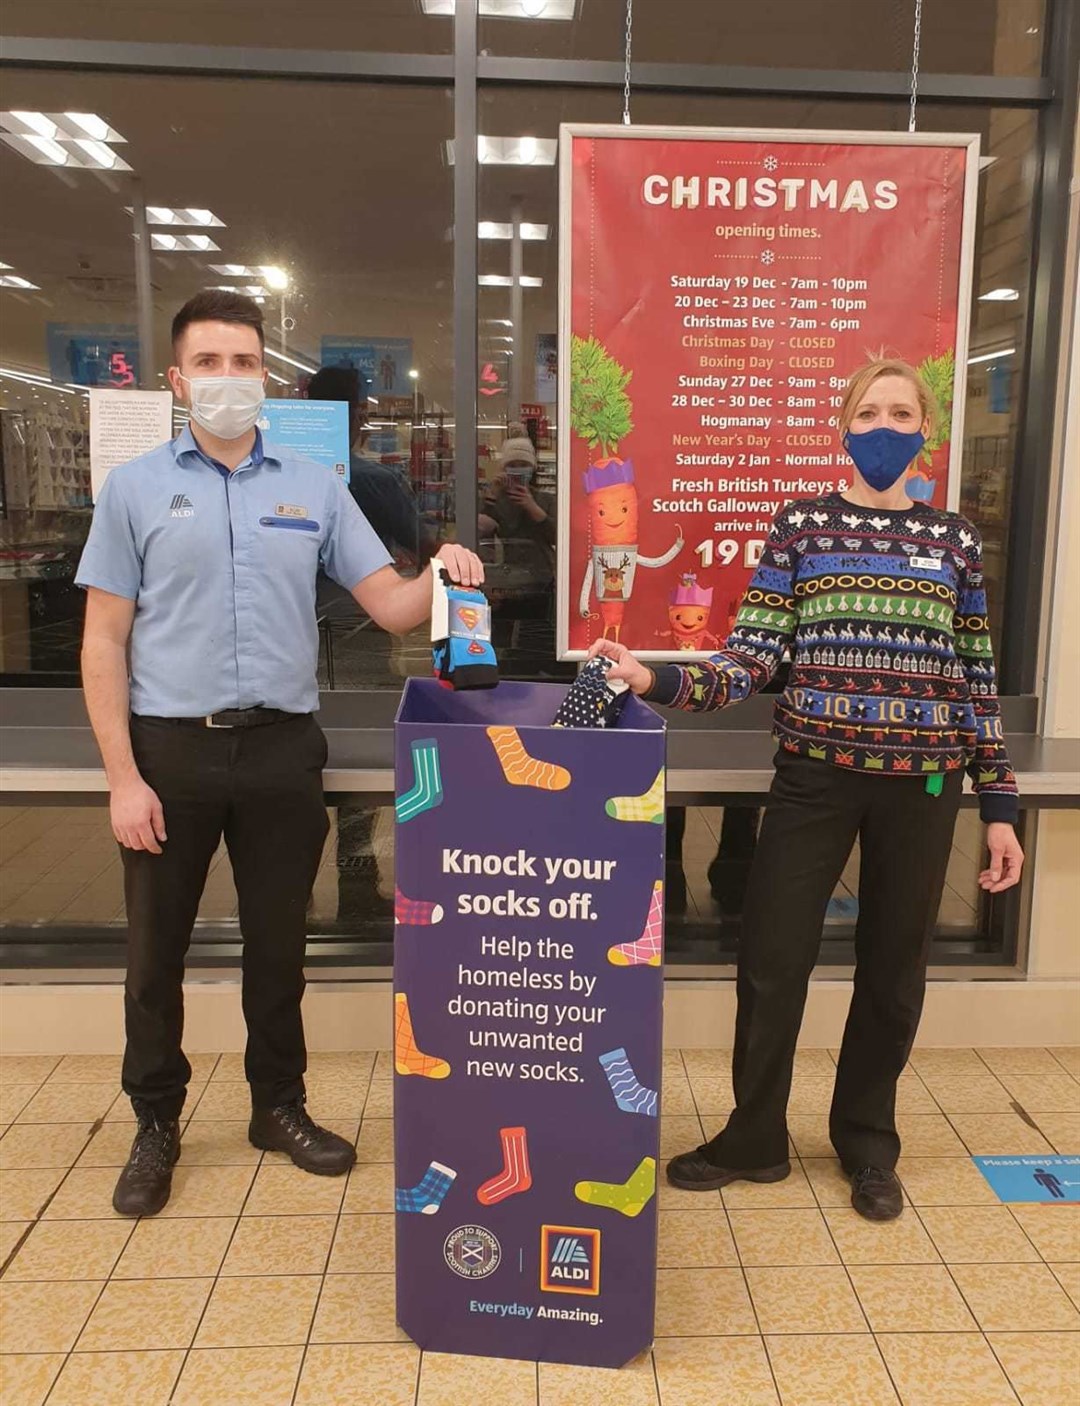 Sock it to us! Allan Jenkins and Kerry MacLeod are among the Aldi staff administering the sock amnesty